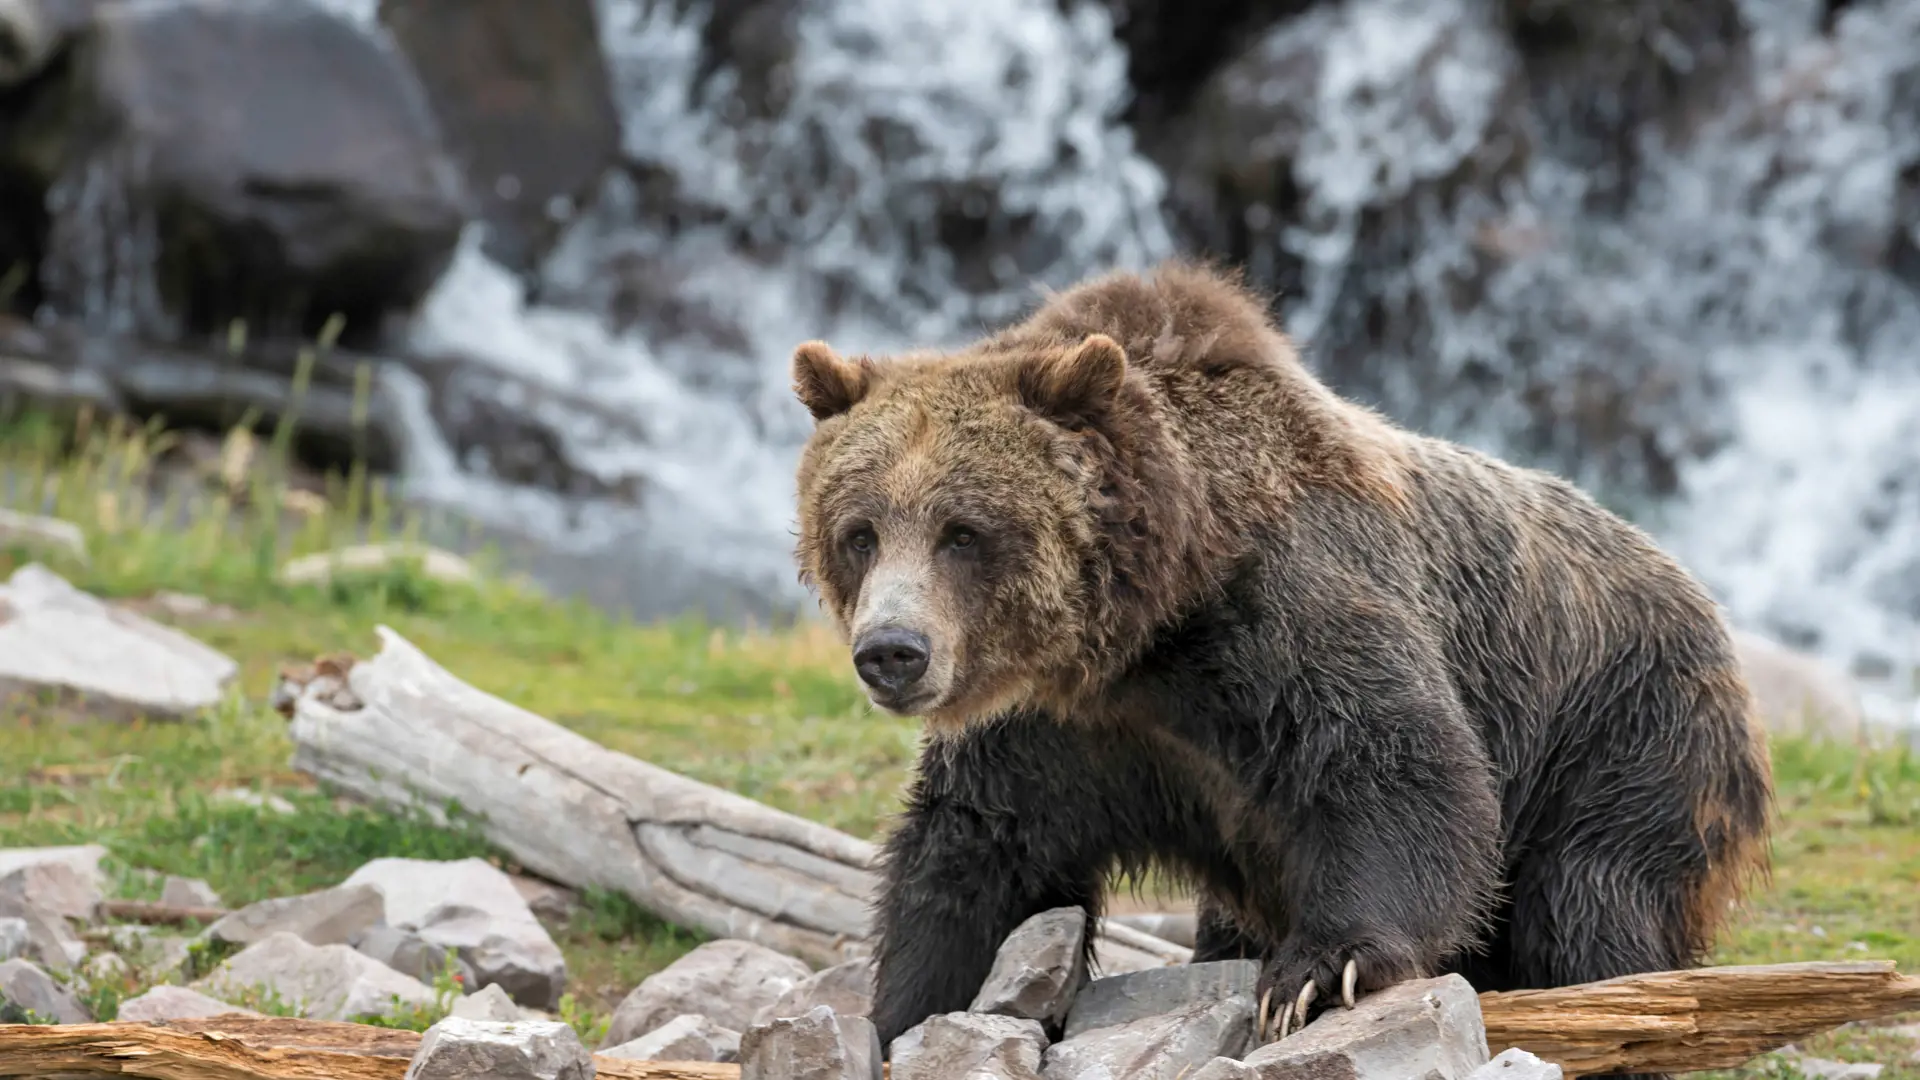 dag 10.shutterstock_154772894 Grizzly bear in Yellowstone National Park, Wyoming.jpg